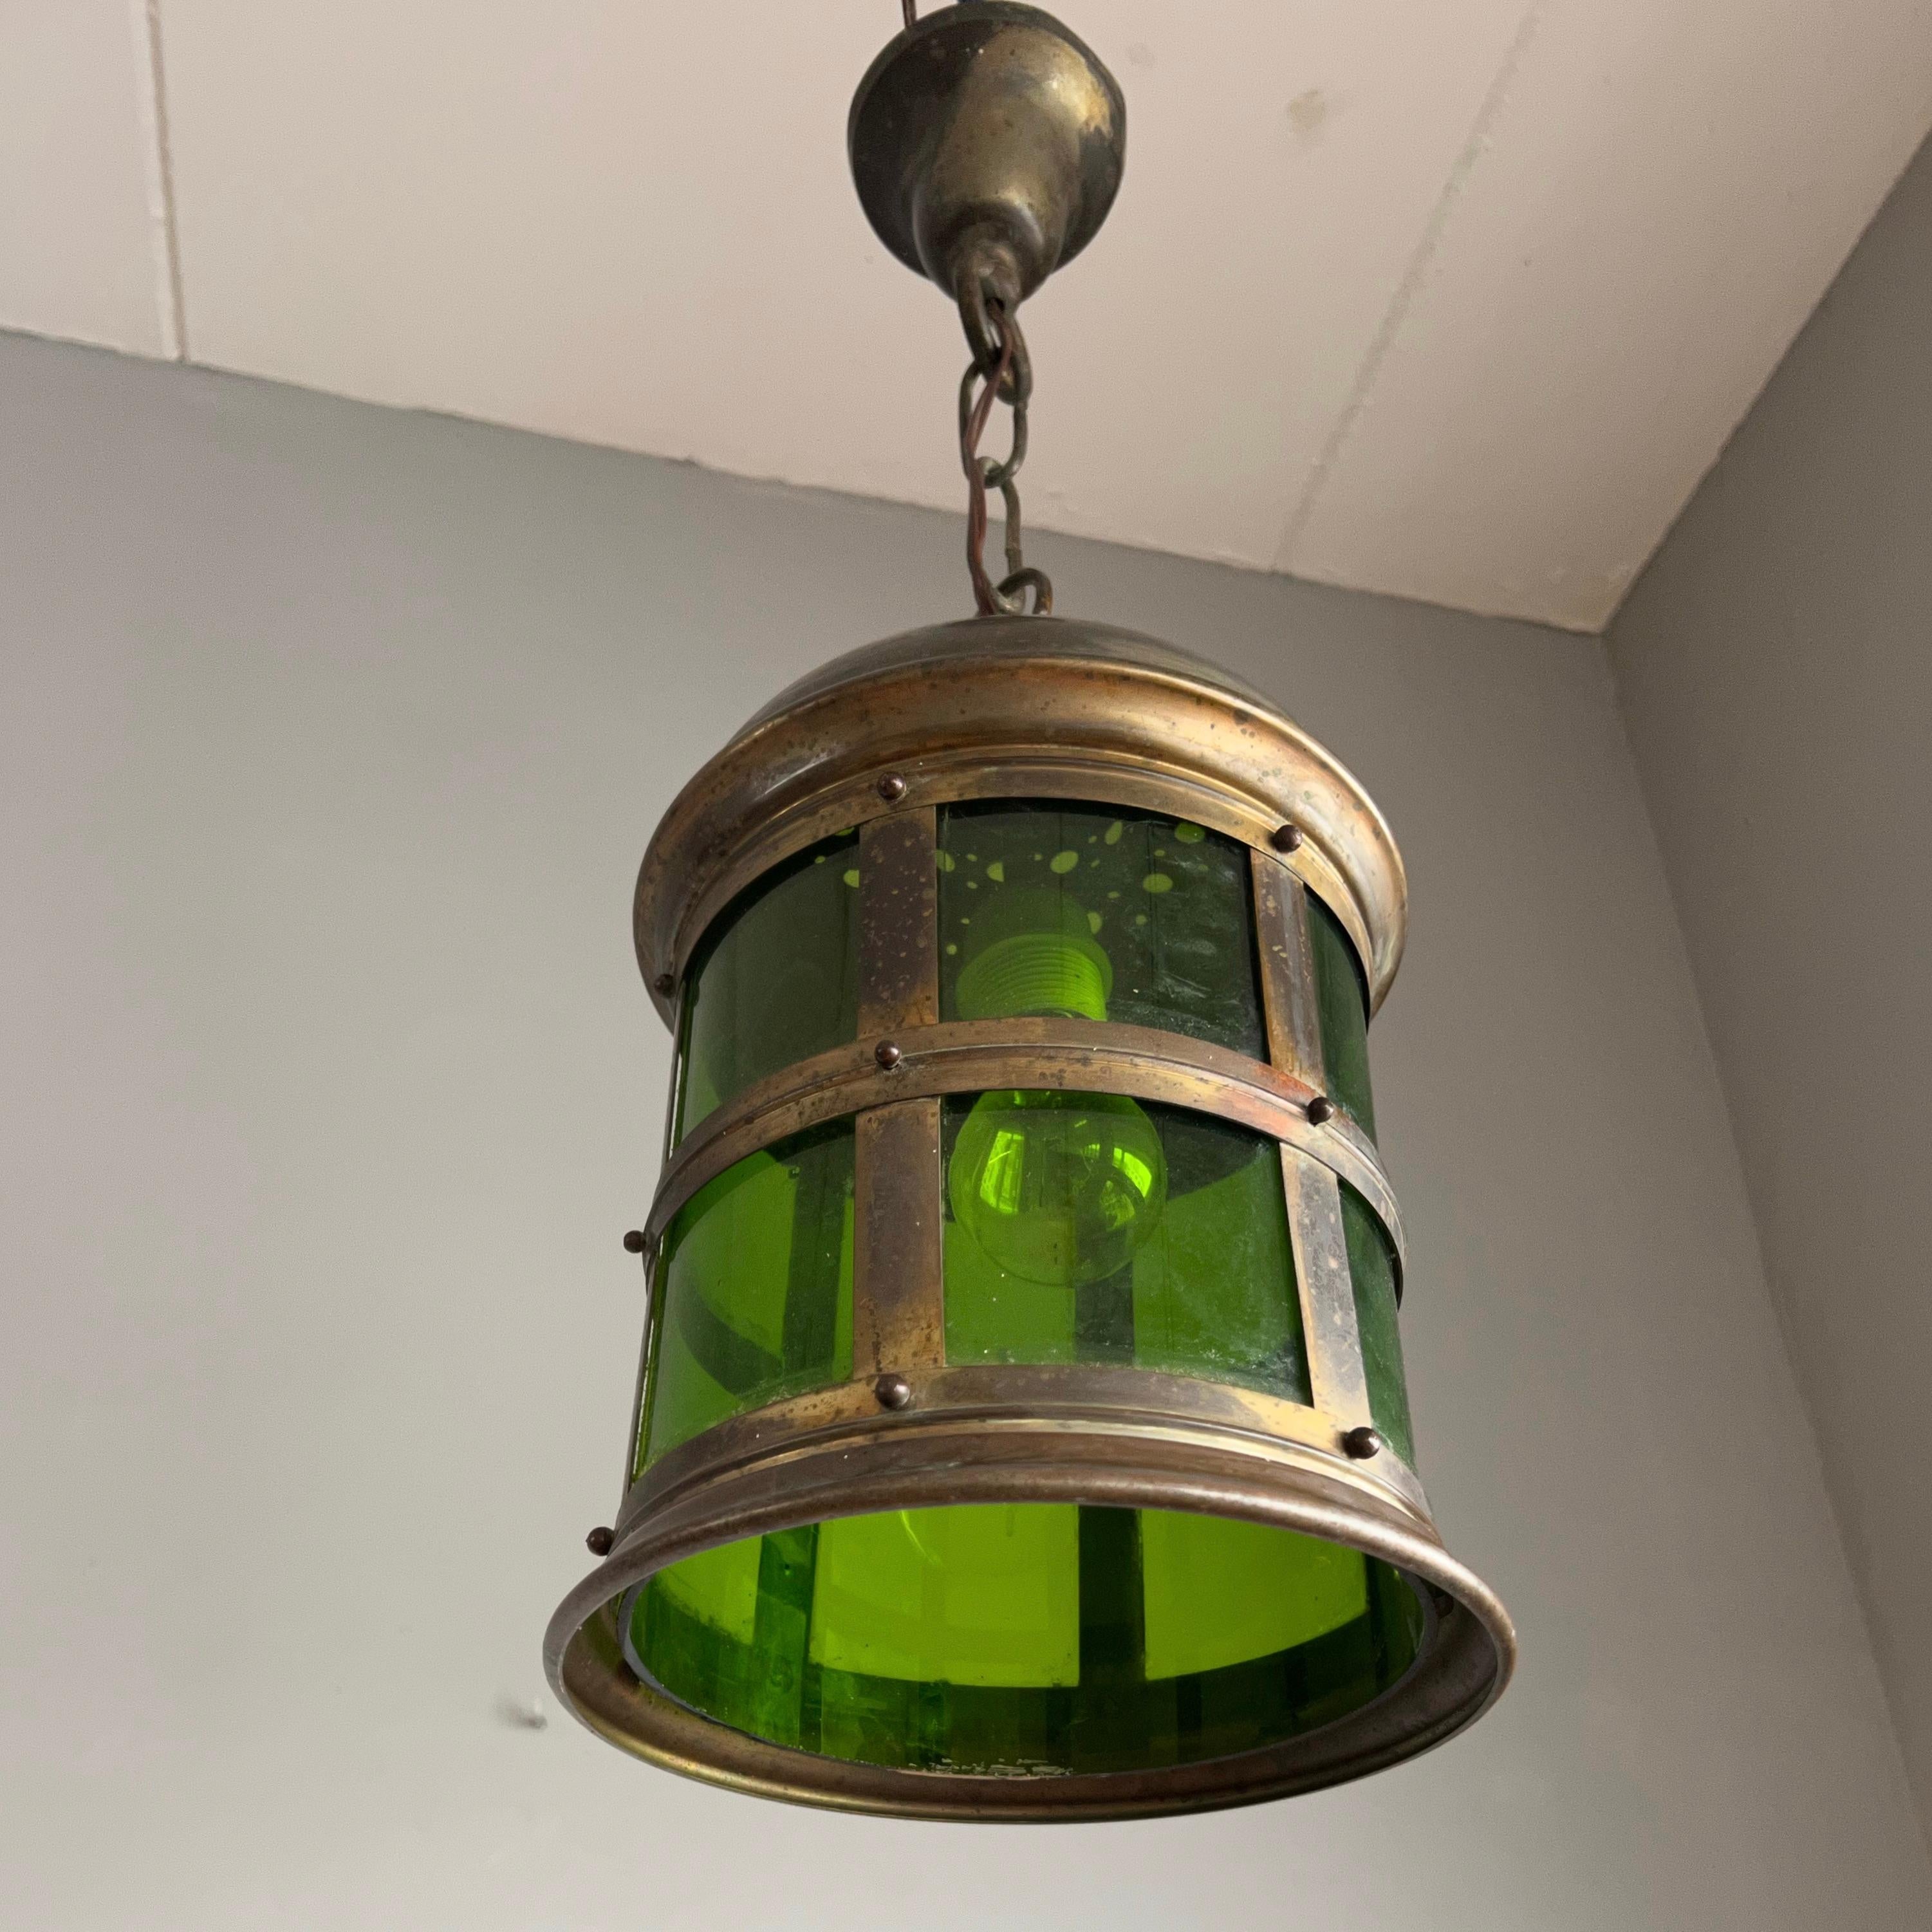 Dutch Arts & Crafts Handcrafted Copper & Green Stained Glass Circular Pendant Lantern For Sale